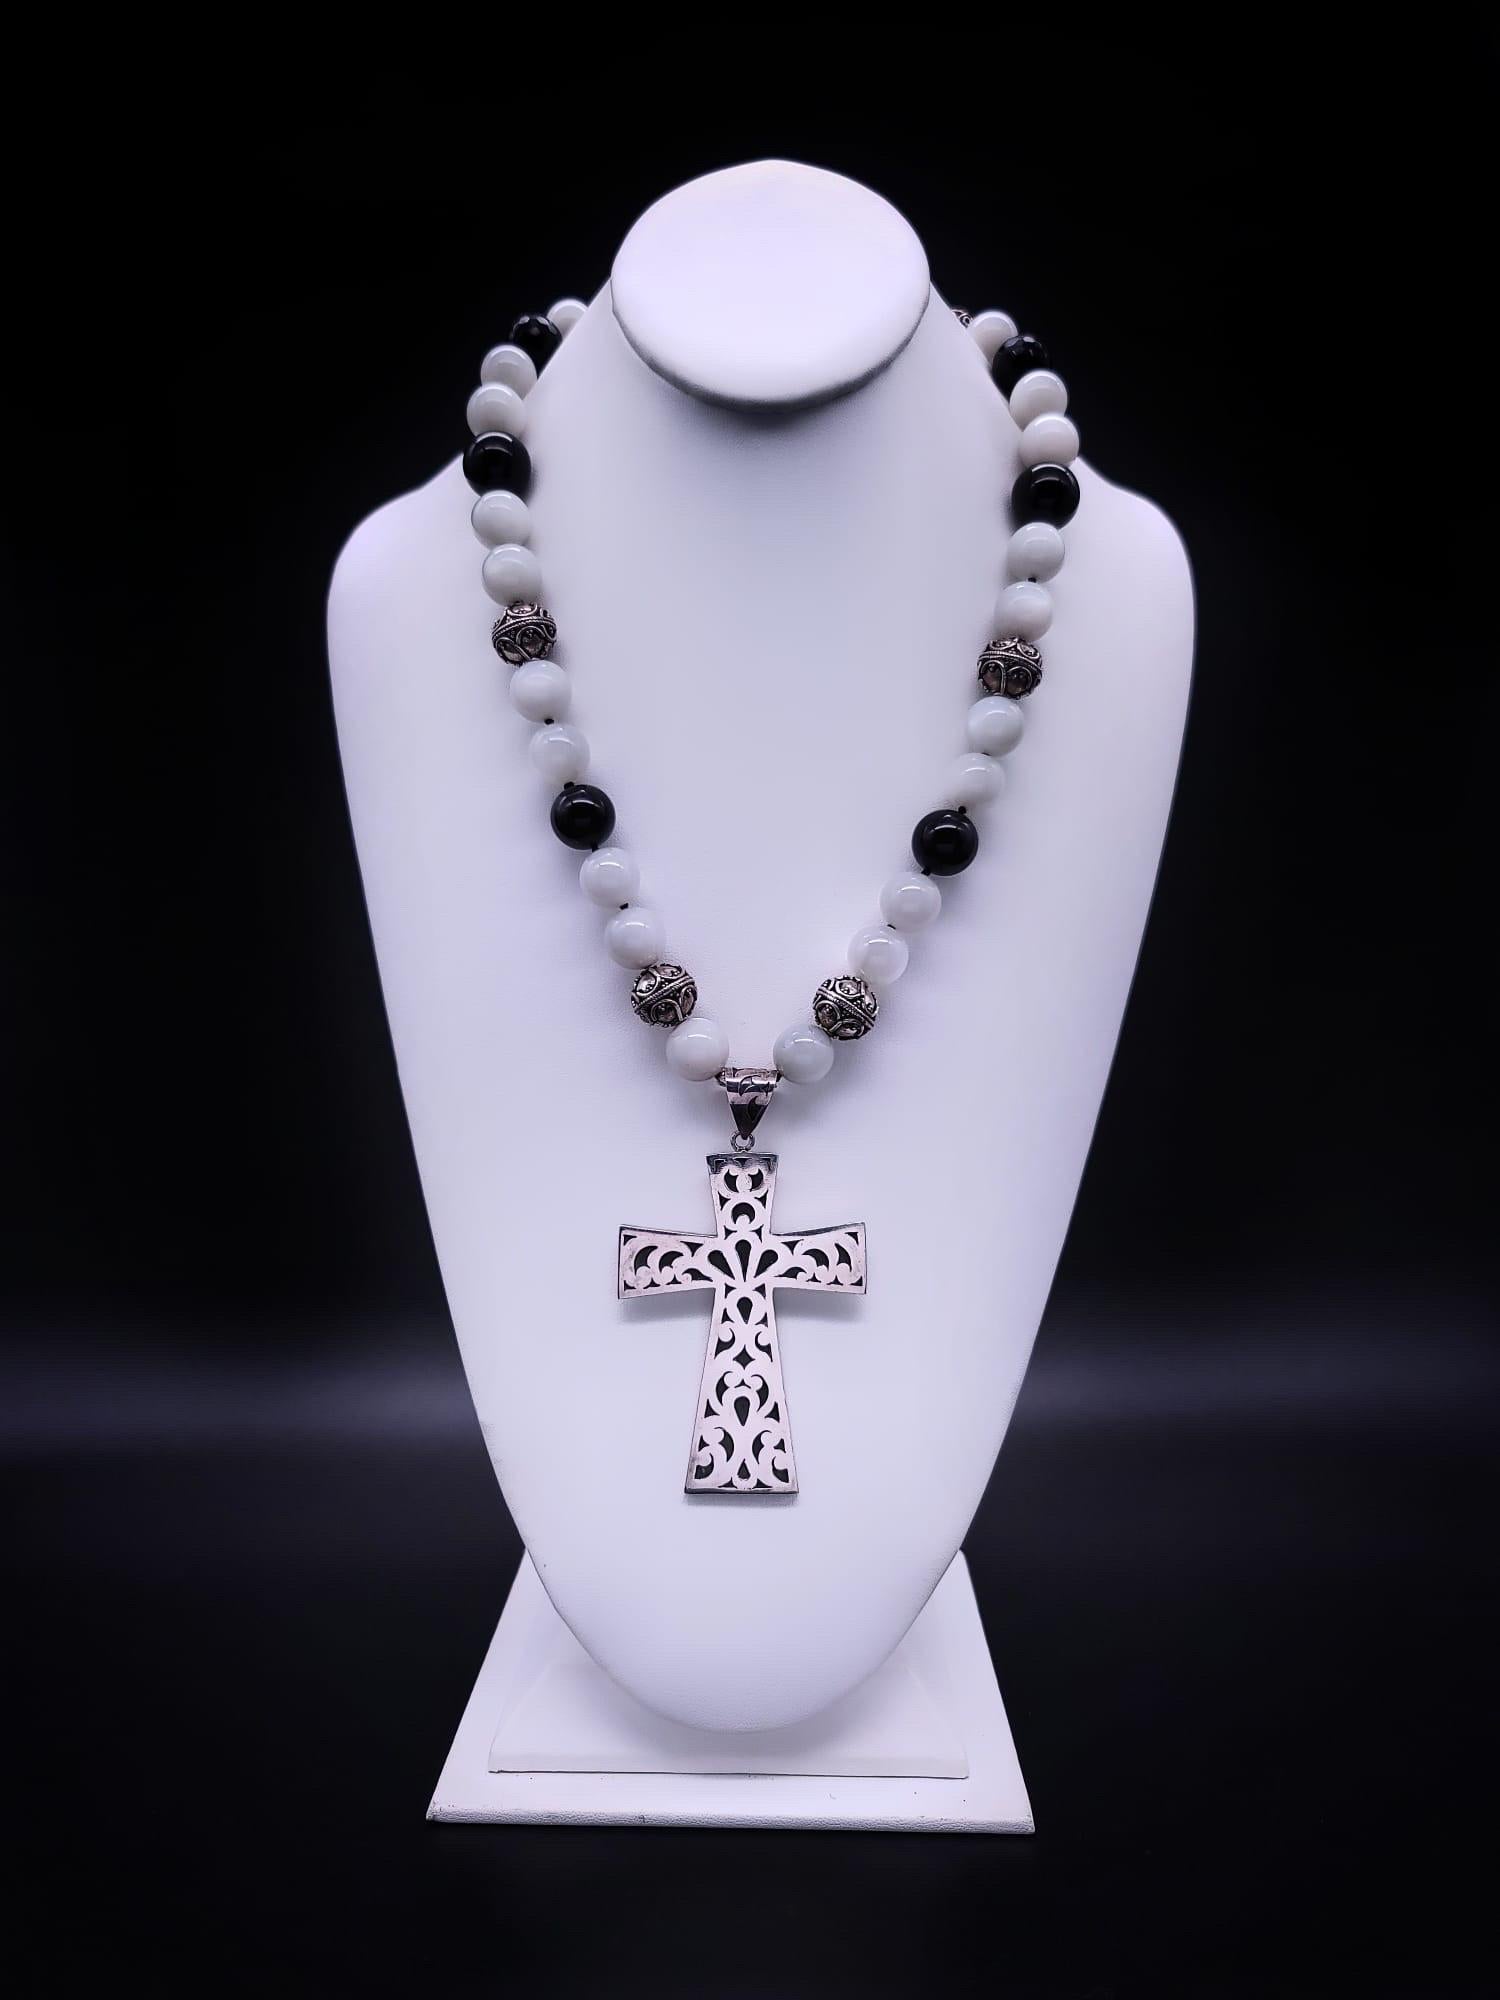 One-of-a-Kind

Heavy signed Sterling Silver cross 7”x 6” manufactured in Bali is suspended from a necklace of white Moonstone, Onyx beads, and filigreed Tibetan Sterling Silver beads. The clasp is of faceted Onyx and Sterling Silver. A very simple